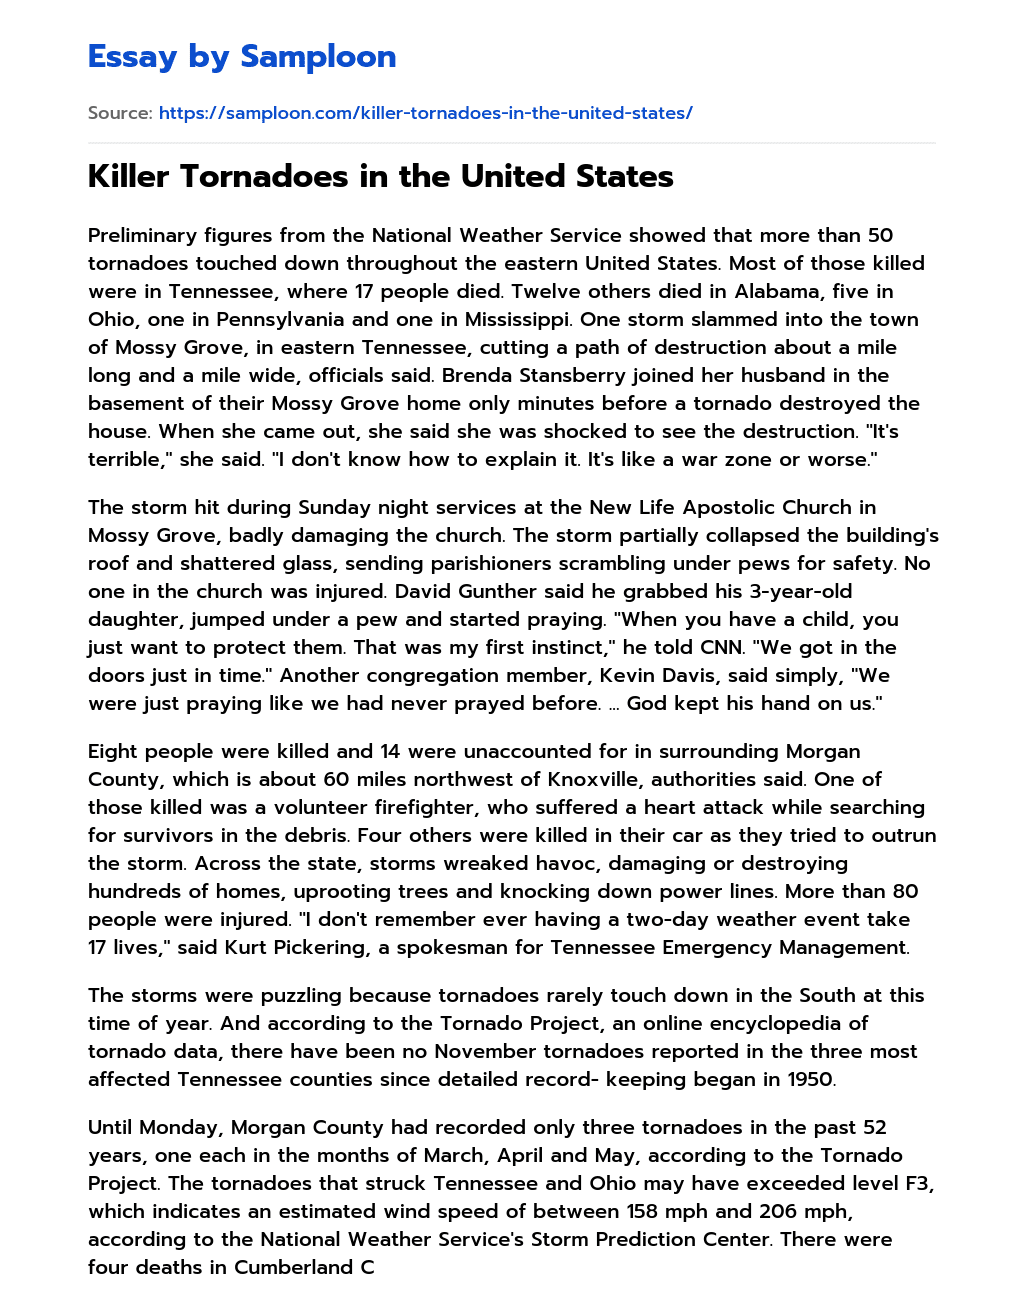 Killer Tornadoes in the United States essay